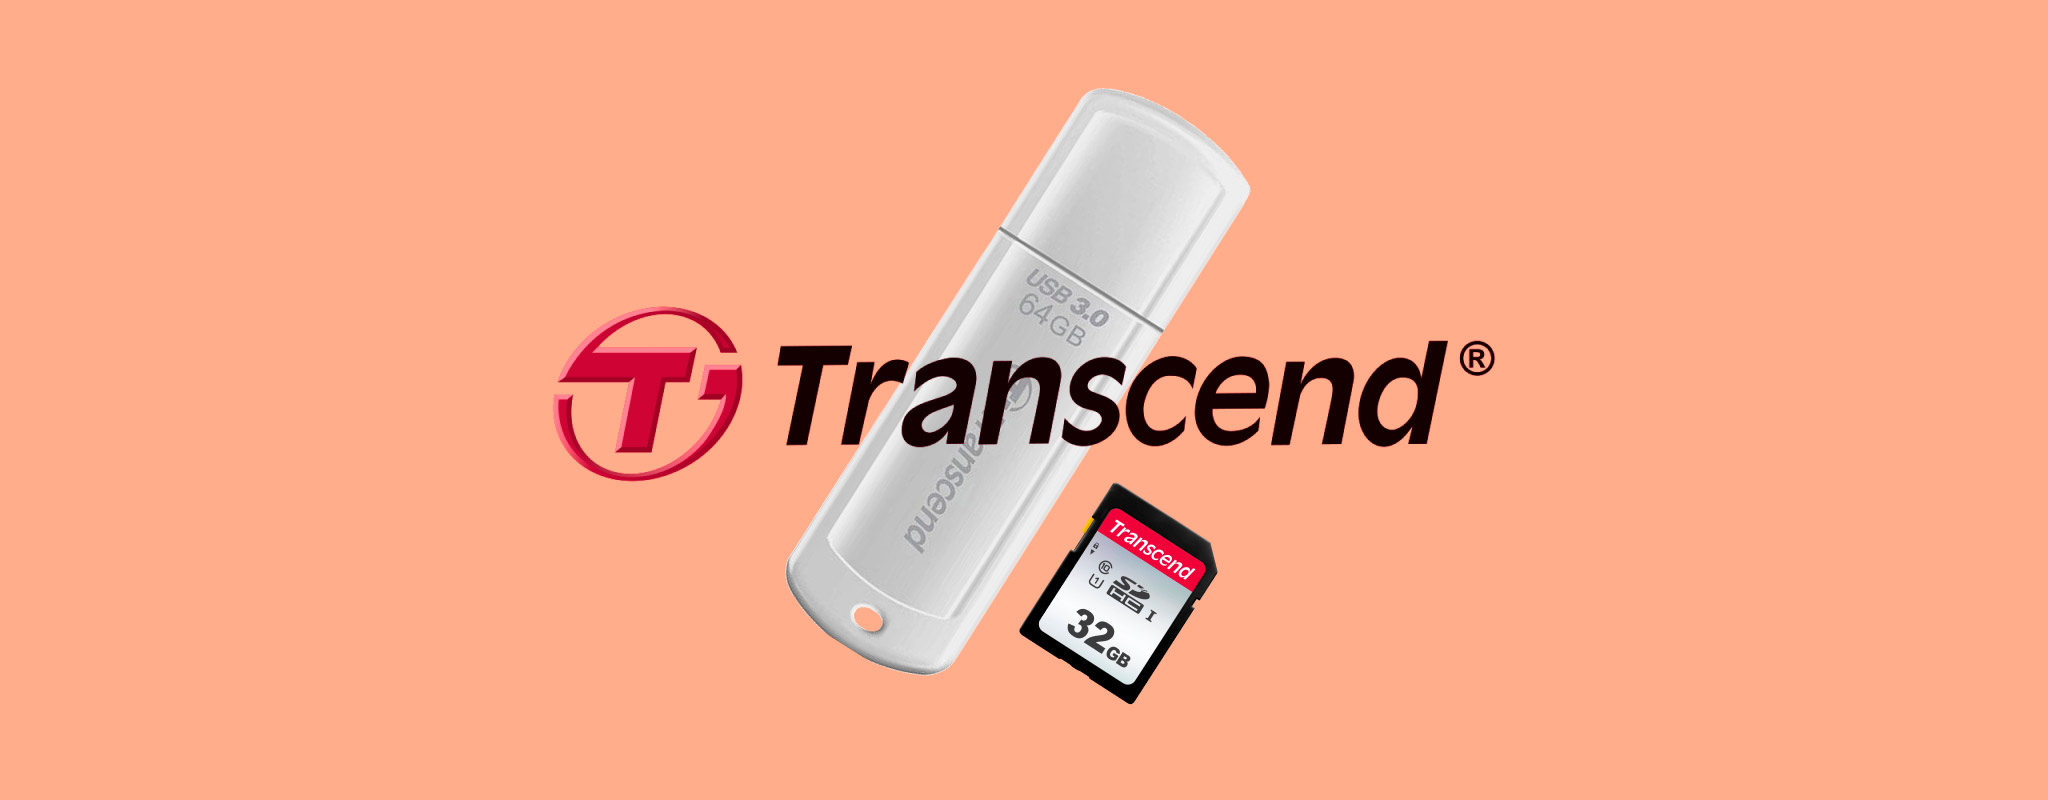 Recover data from Transcend device